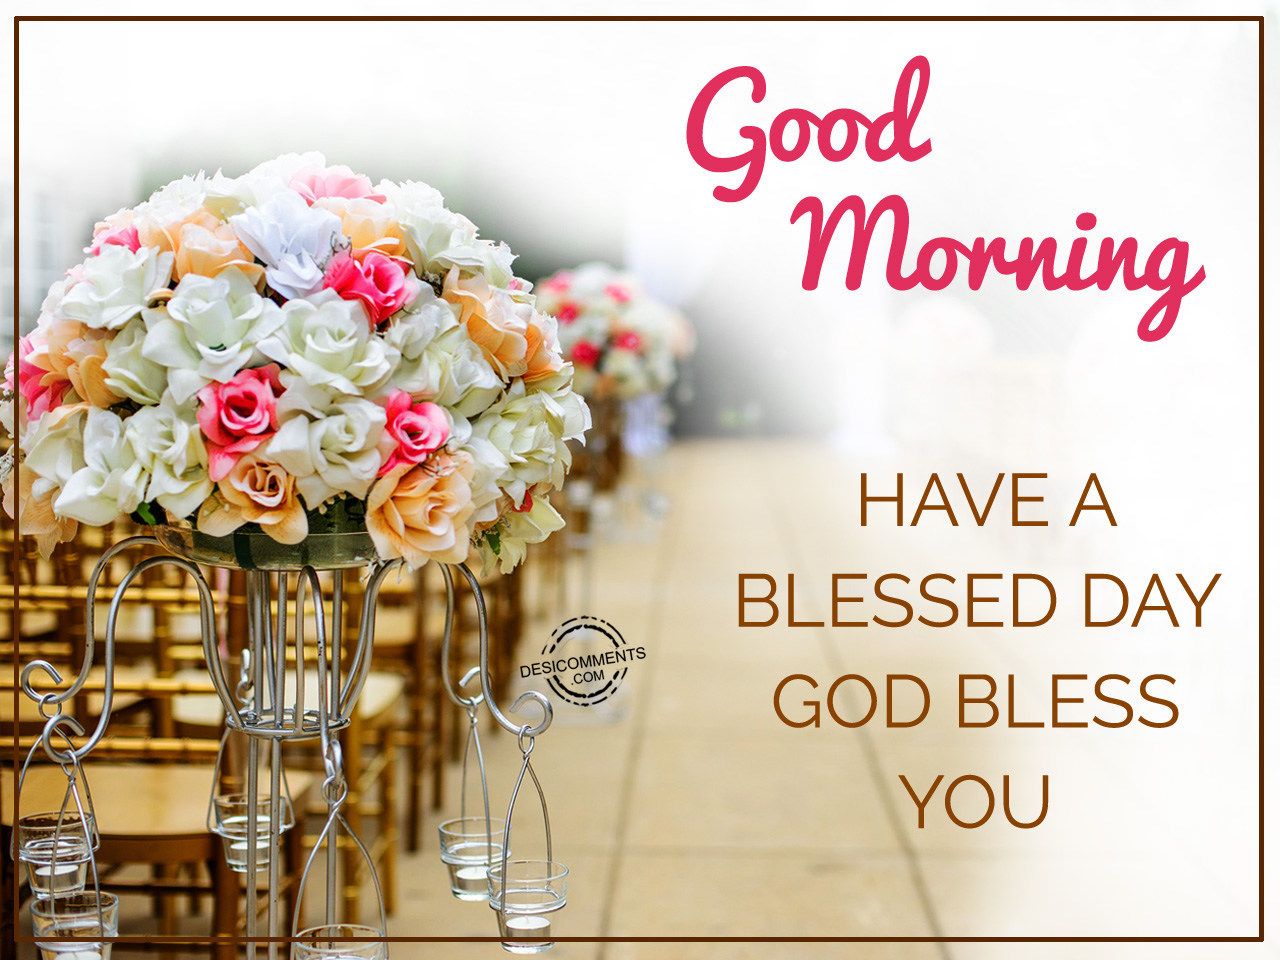 Christian good morning images for whatsapp free download acid-base balance ppt download